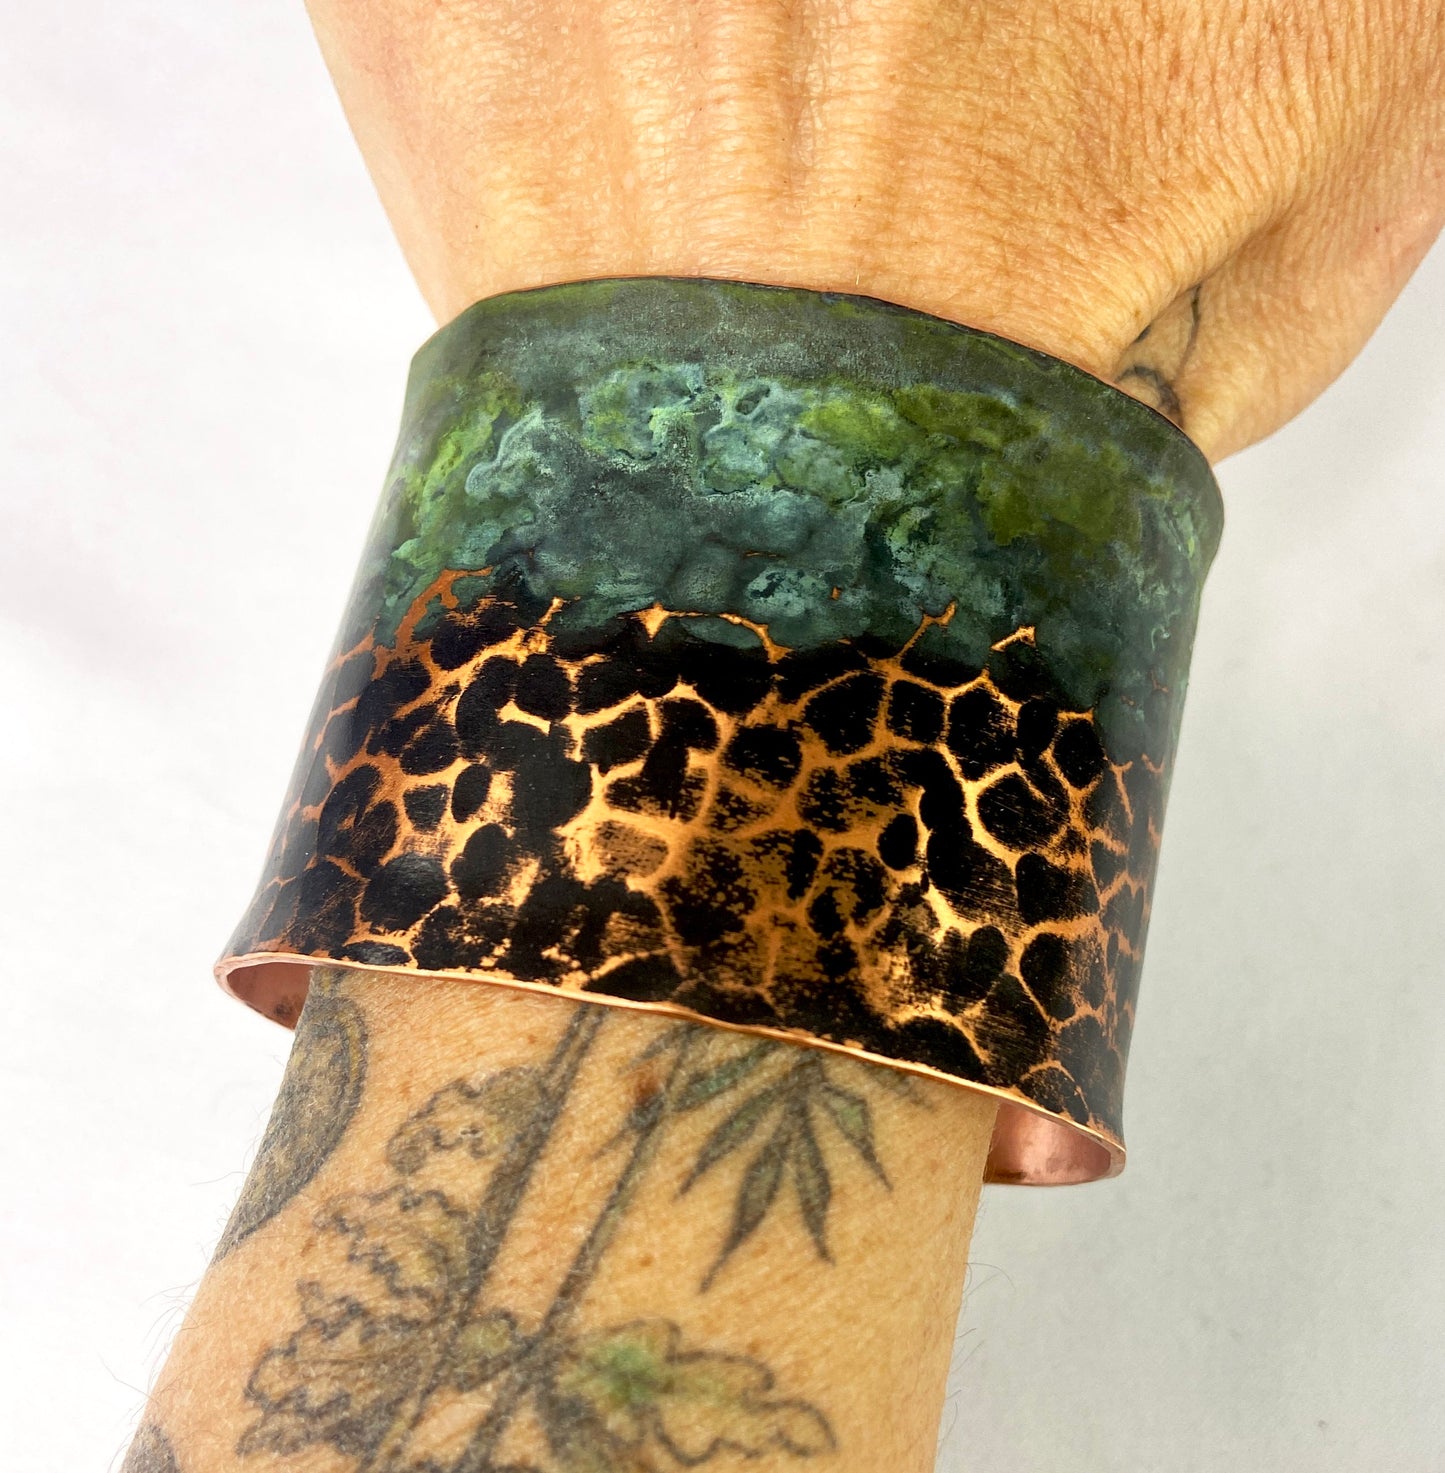 Hammered Copper Cuff Bracelet with Antique and Green